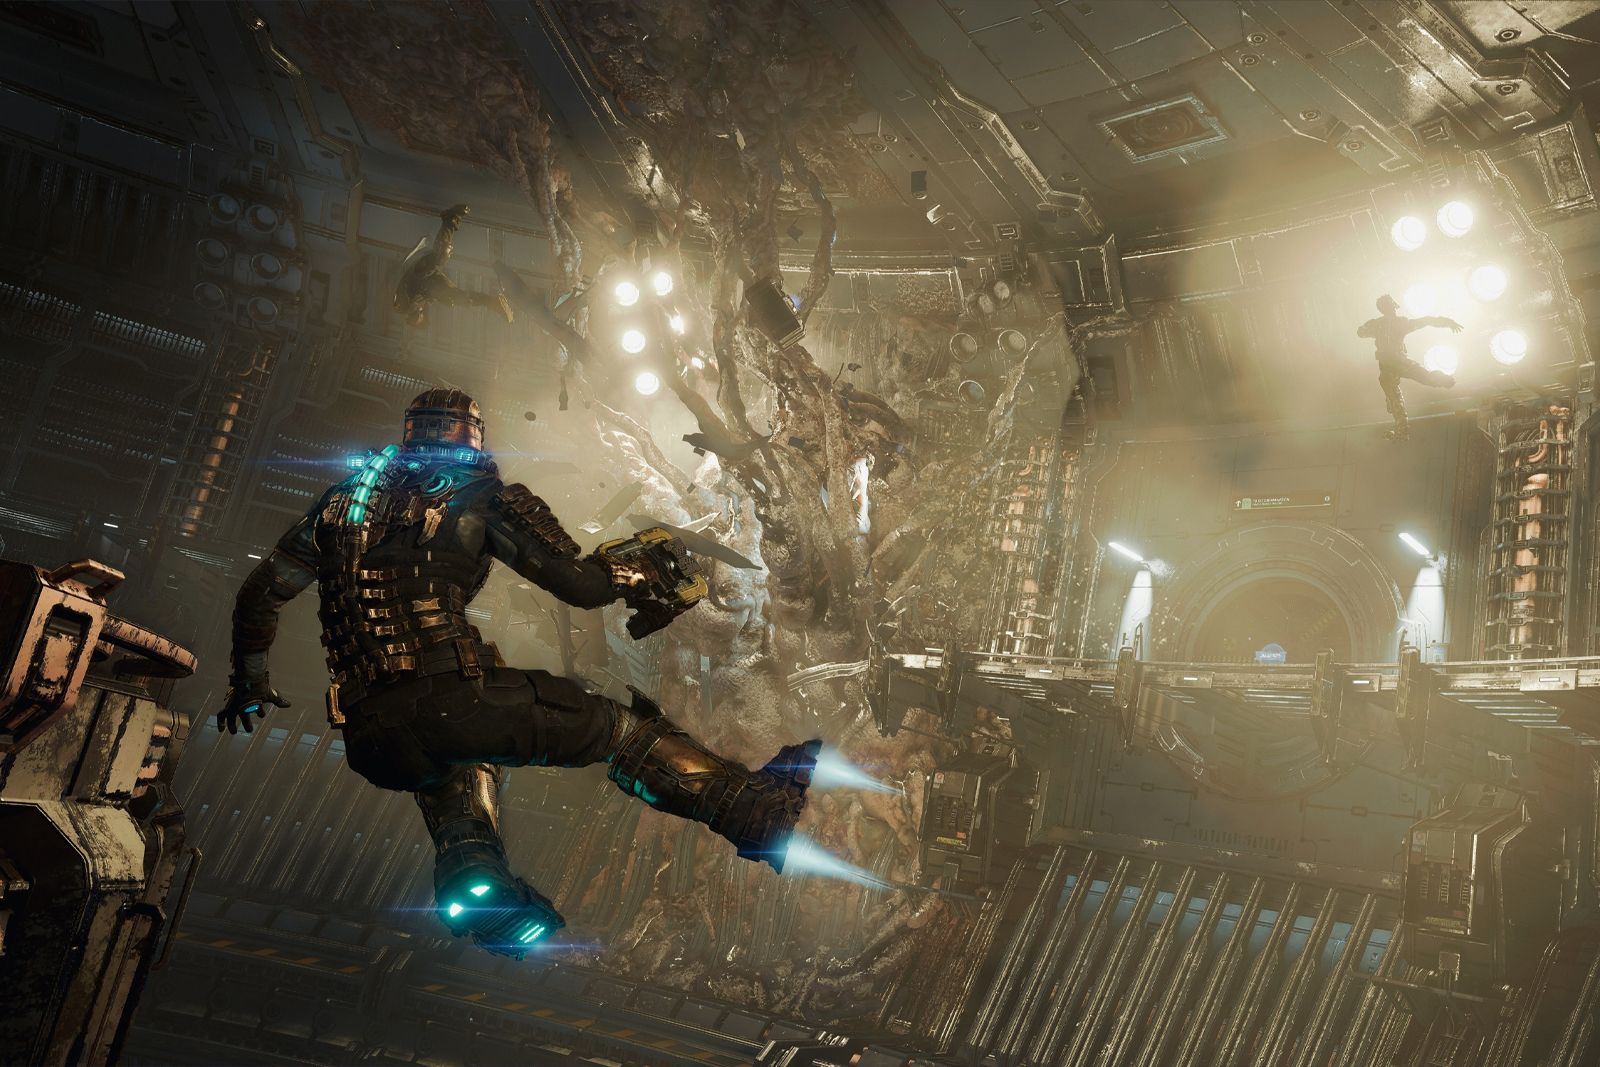 Dead Space character floating in space